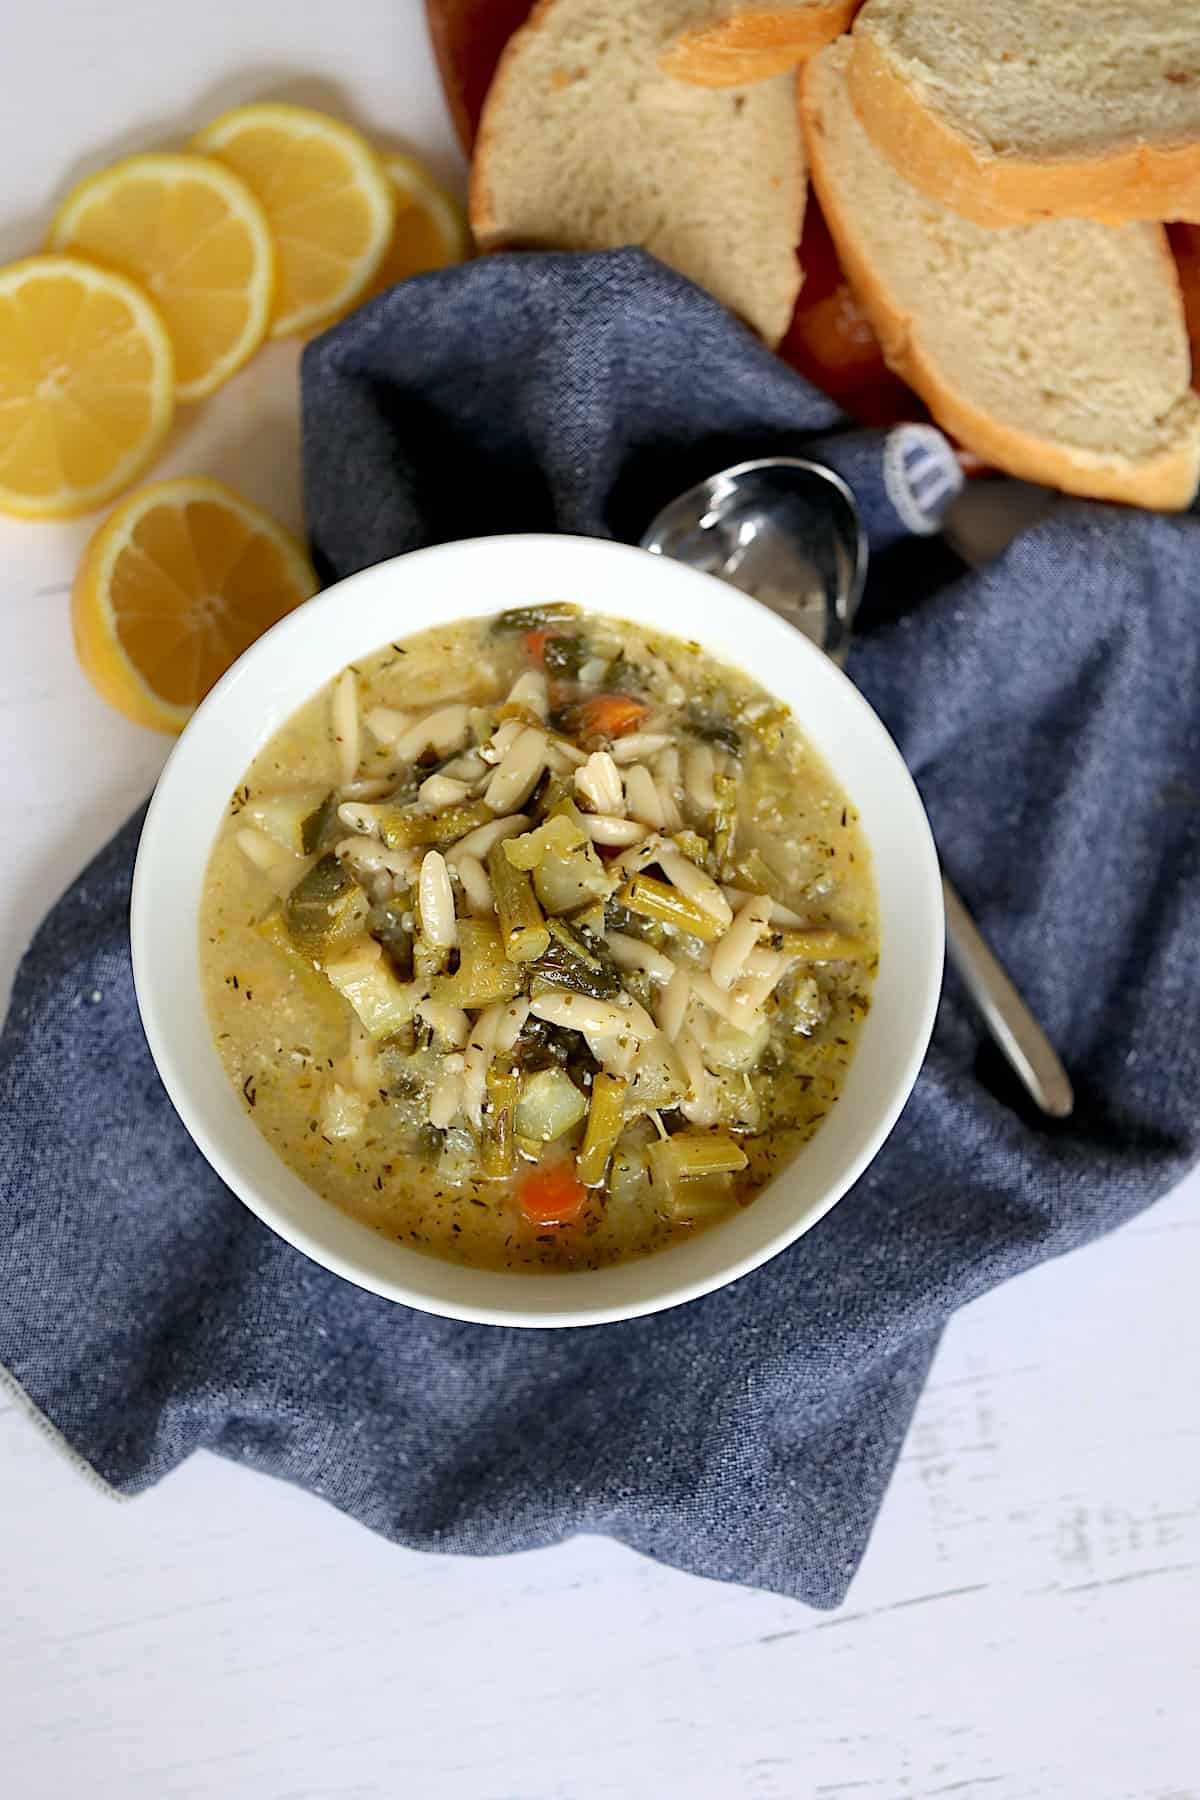 instant pot garden vegetable minestrone soup in a white bowl with bread and lemons